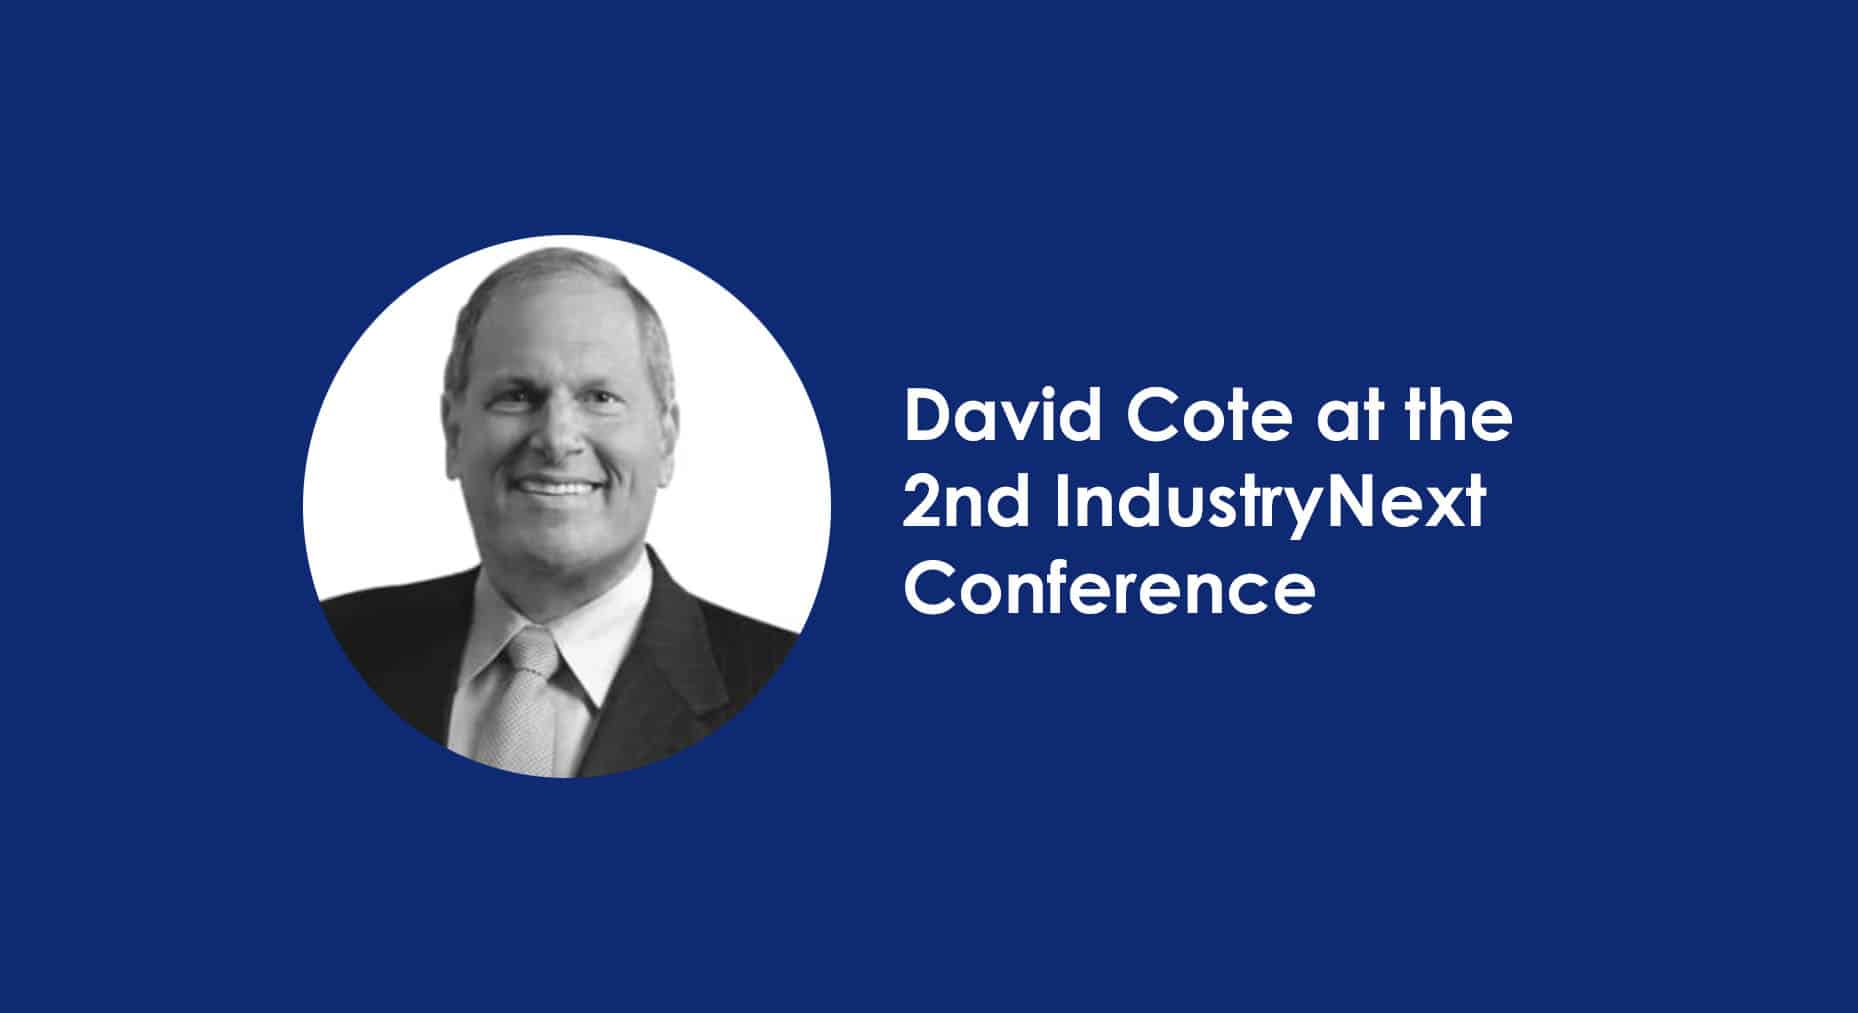 David Cote at the 2nd IndustryNext Conference